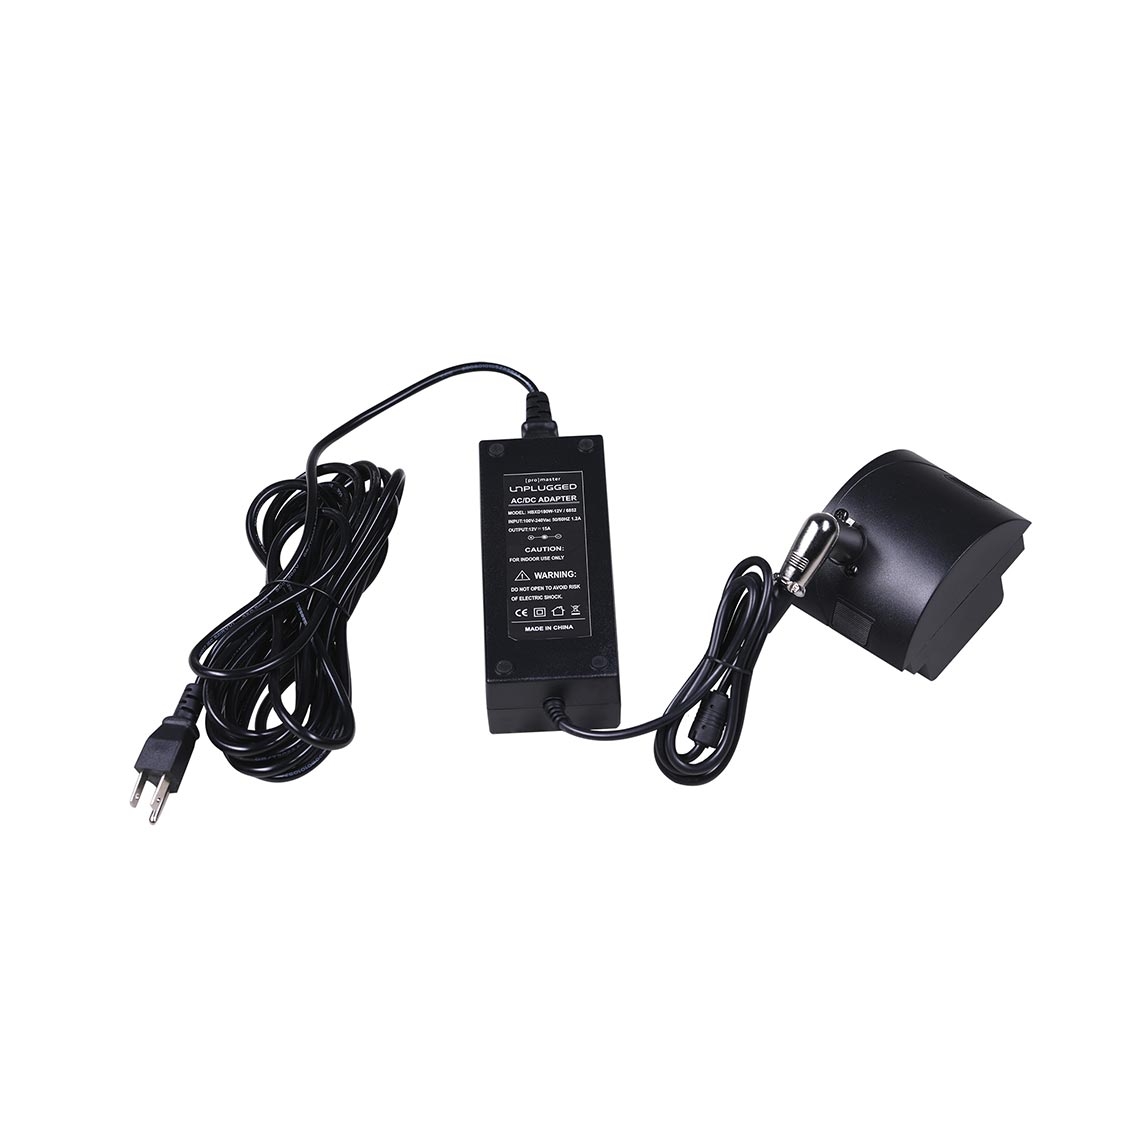 Promaster Unplugged AC Adapter for m400, m600, TTL400 and TTL600